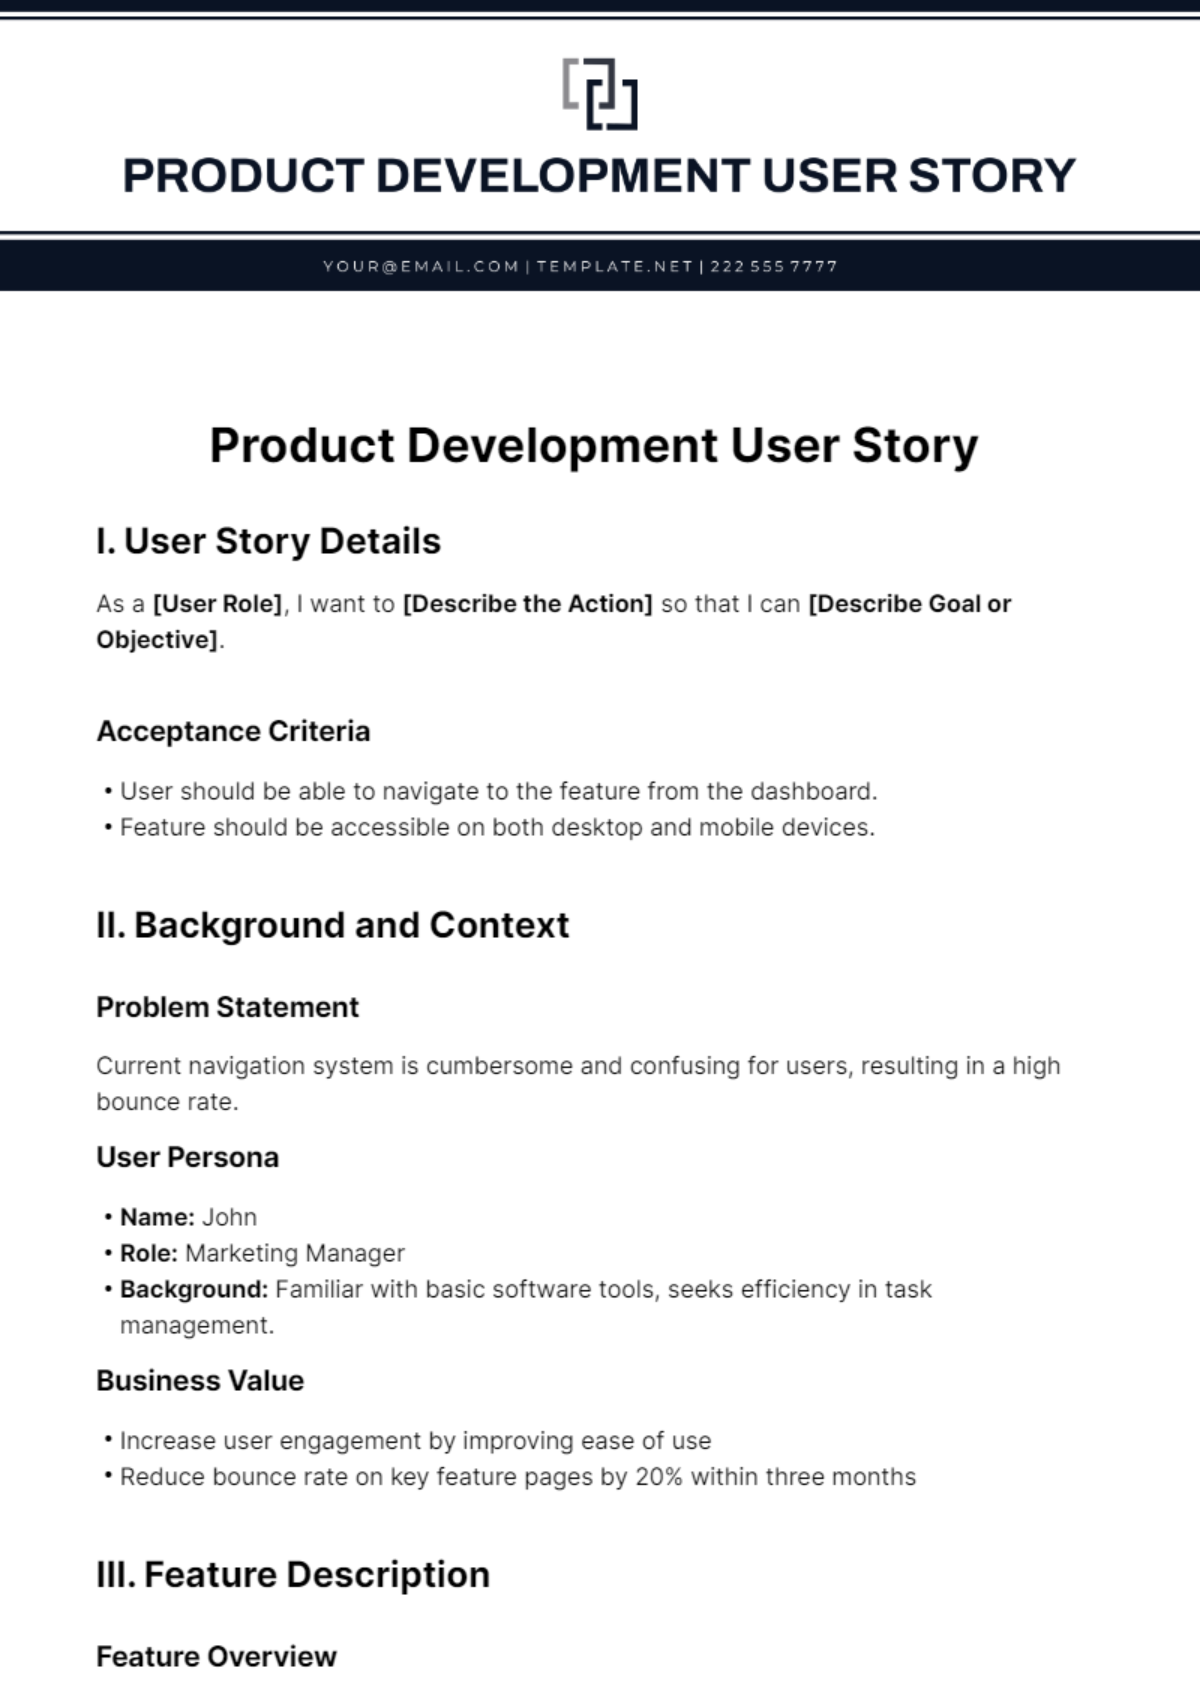 Free Product Development User Story Template